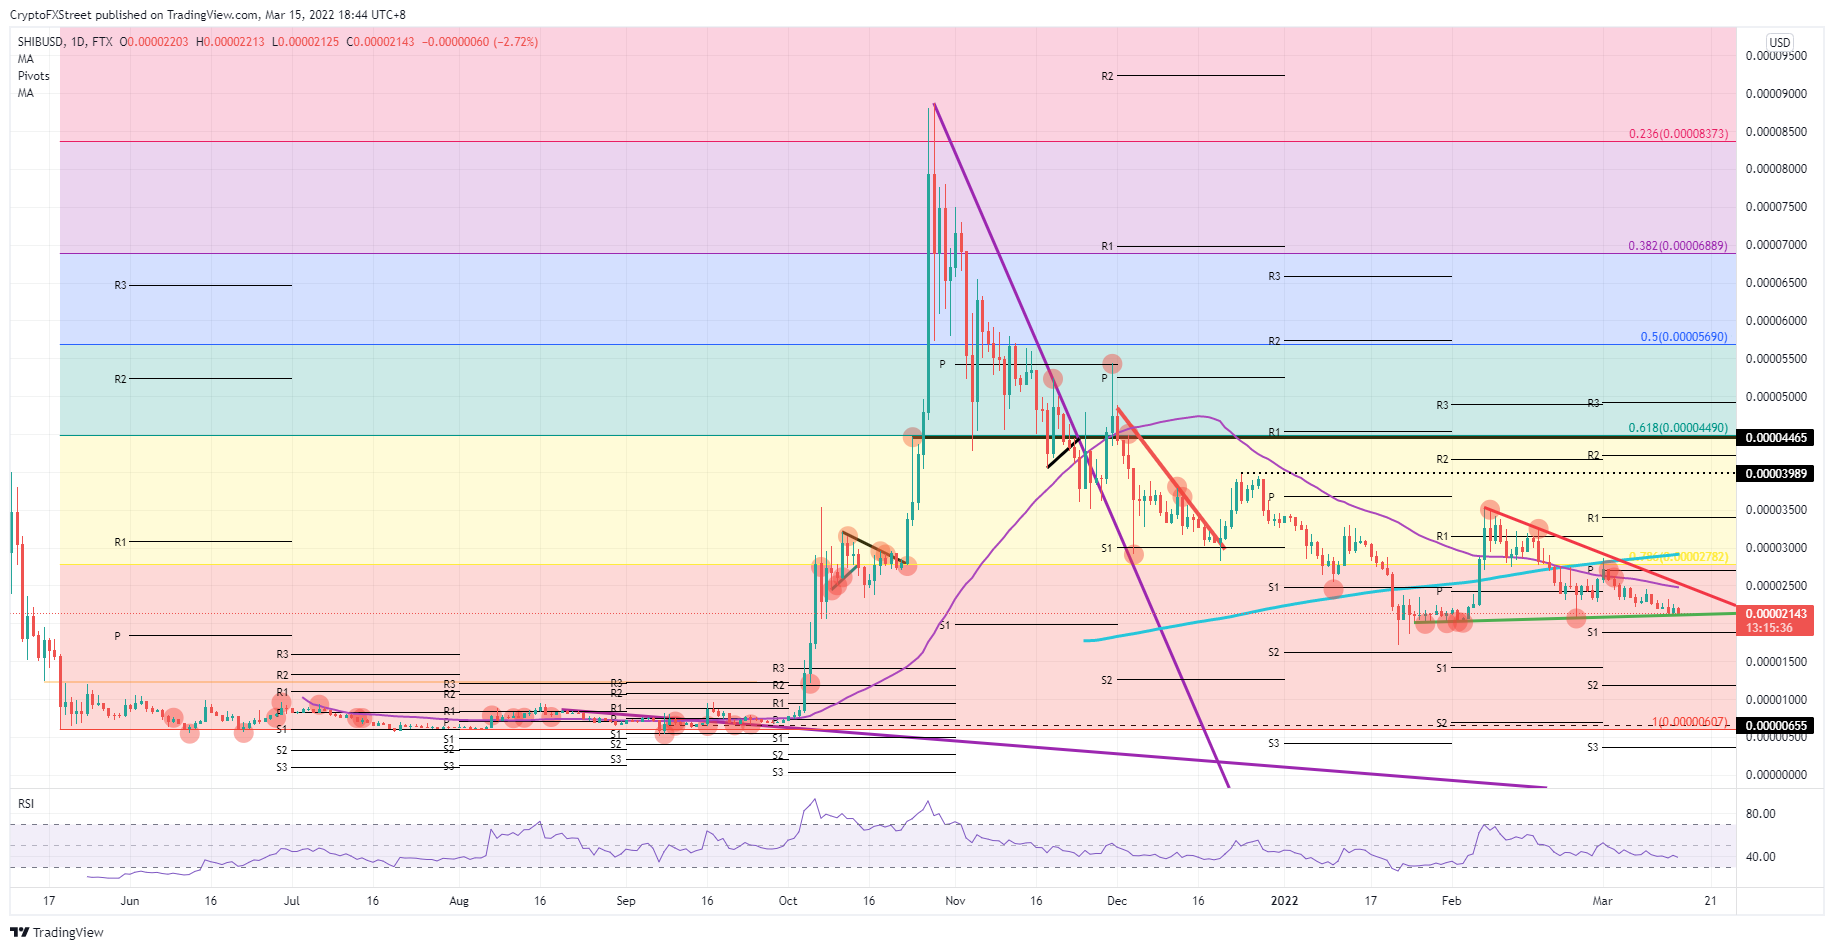 Shiba Inu price to complete the bearish pattern with a 70% drop - 1